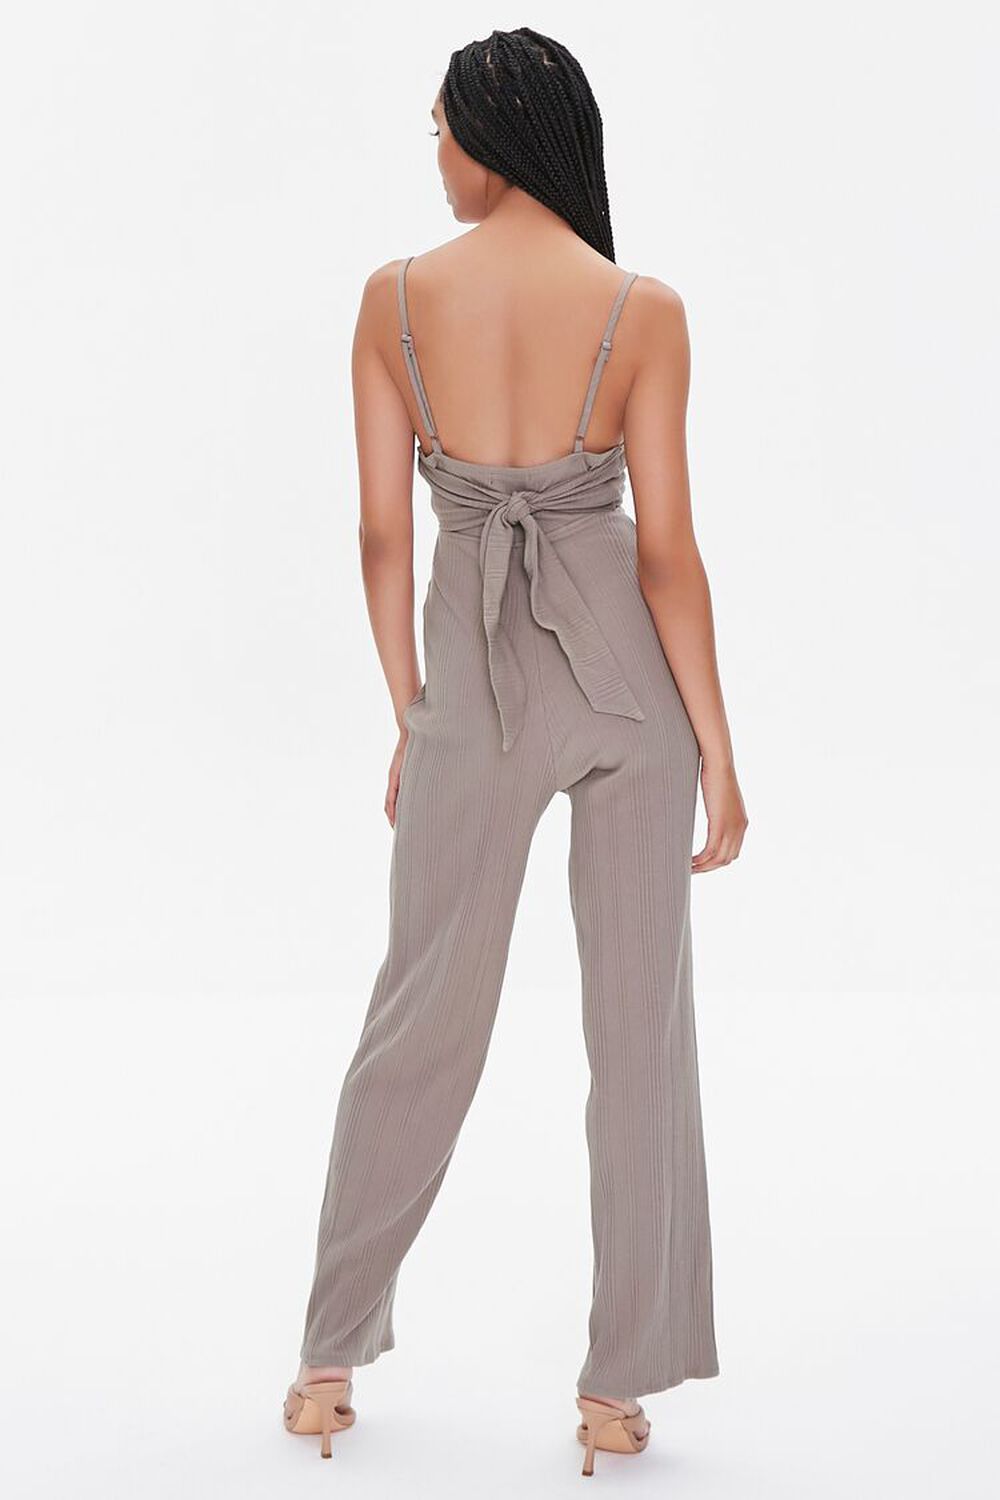 TAUPE Ribbed Knit Cutout Jumpsuit, image 3